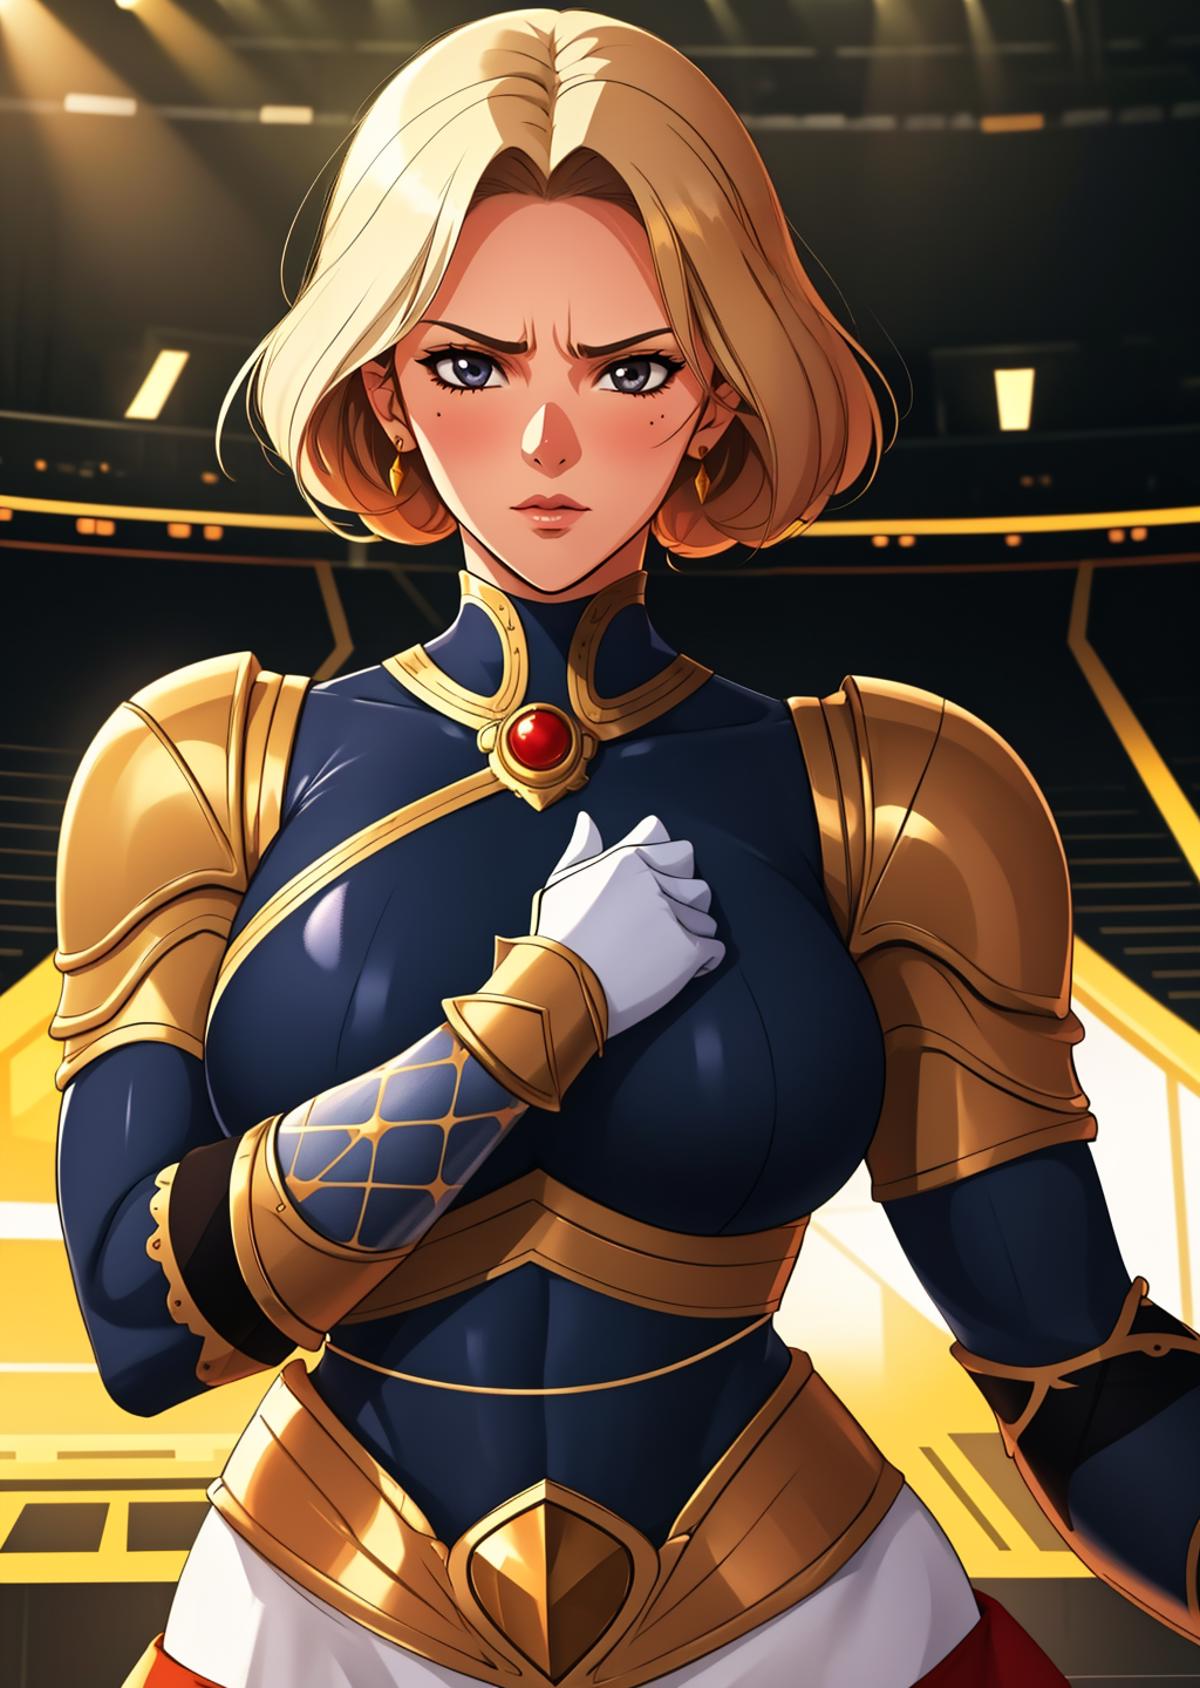 Cartoon illustration of a woman in a blue costume with a gold chestpiece and a white glove on her right hand.